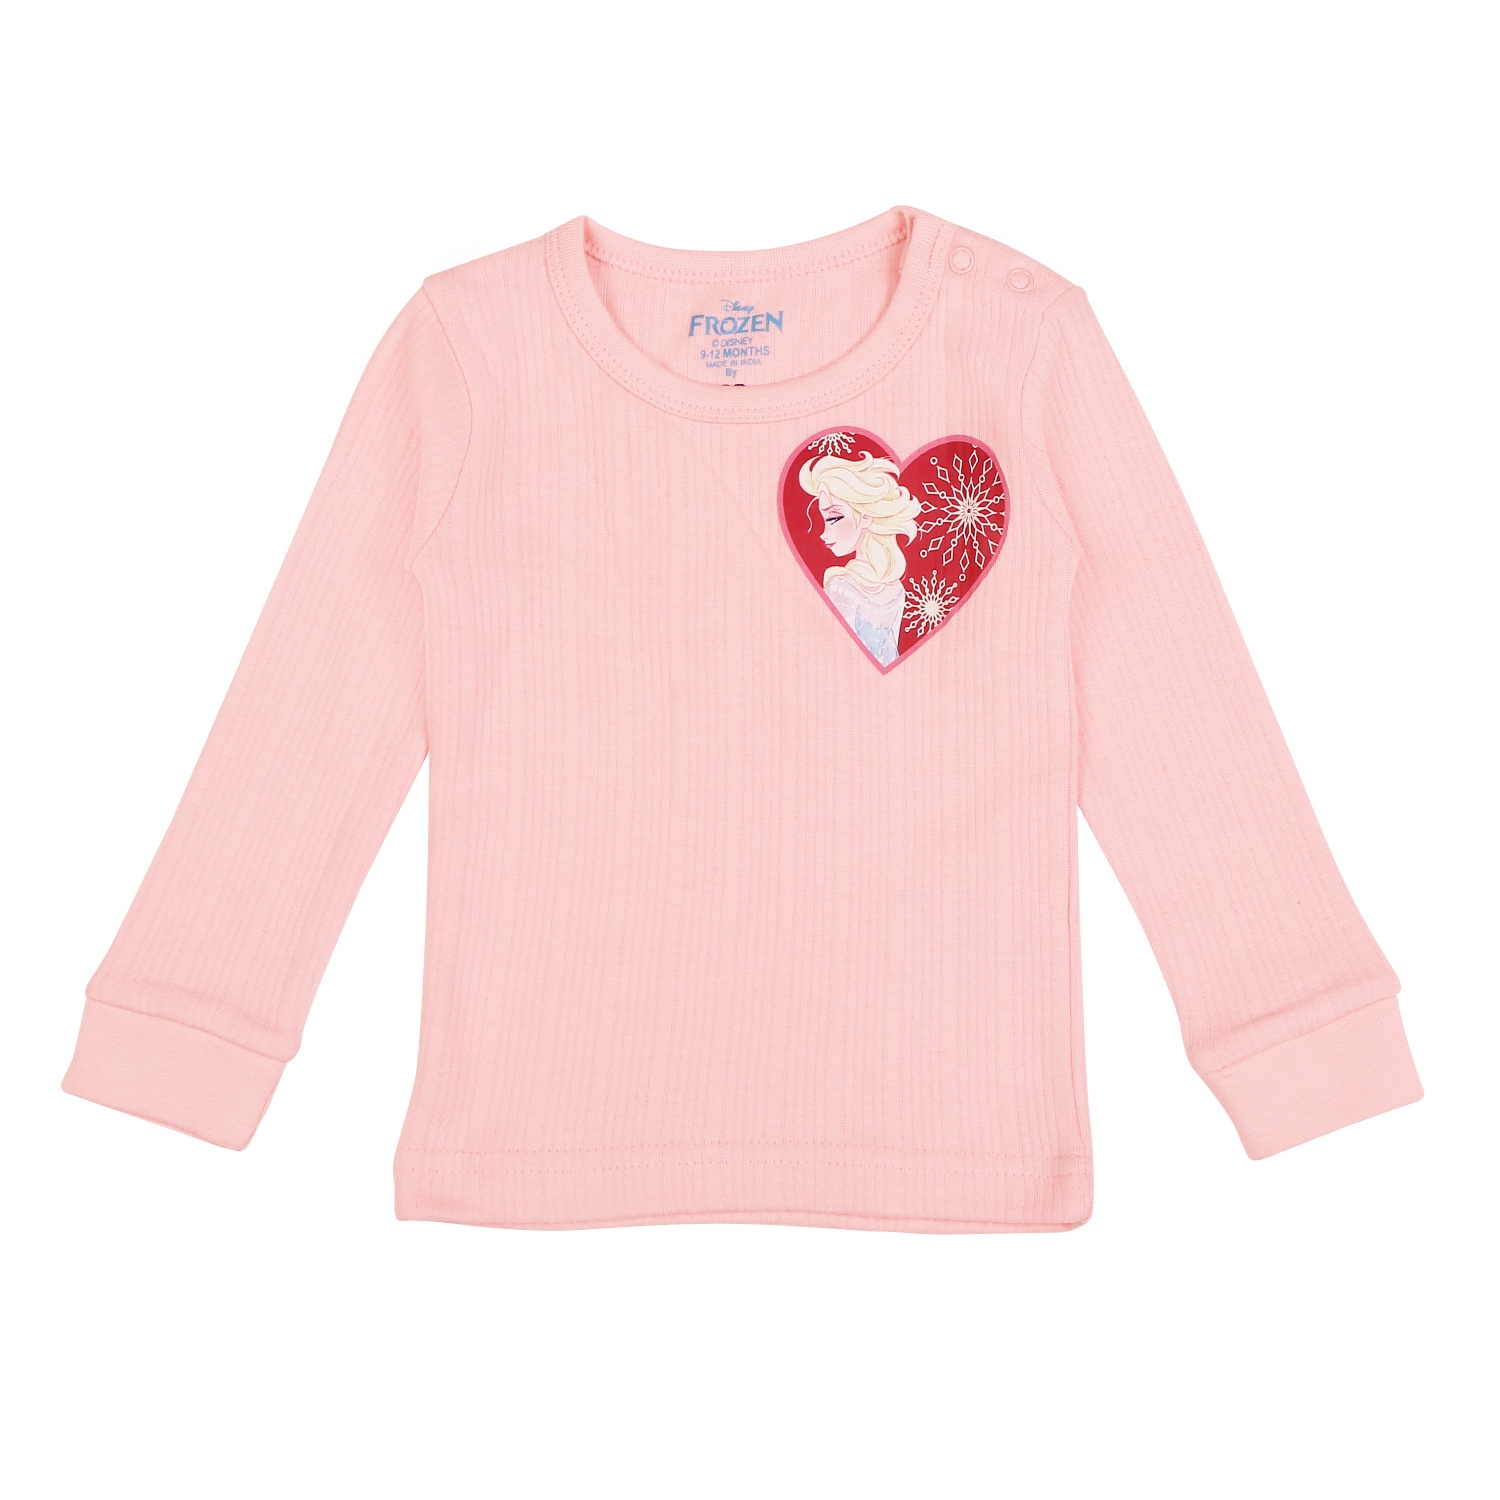 Mothercare | Girls Full Sleeves Frozen Thermal Vest-Pink